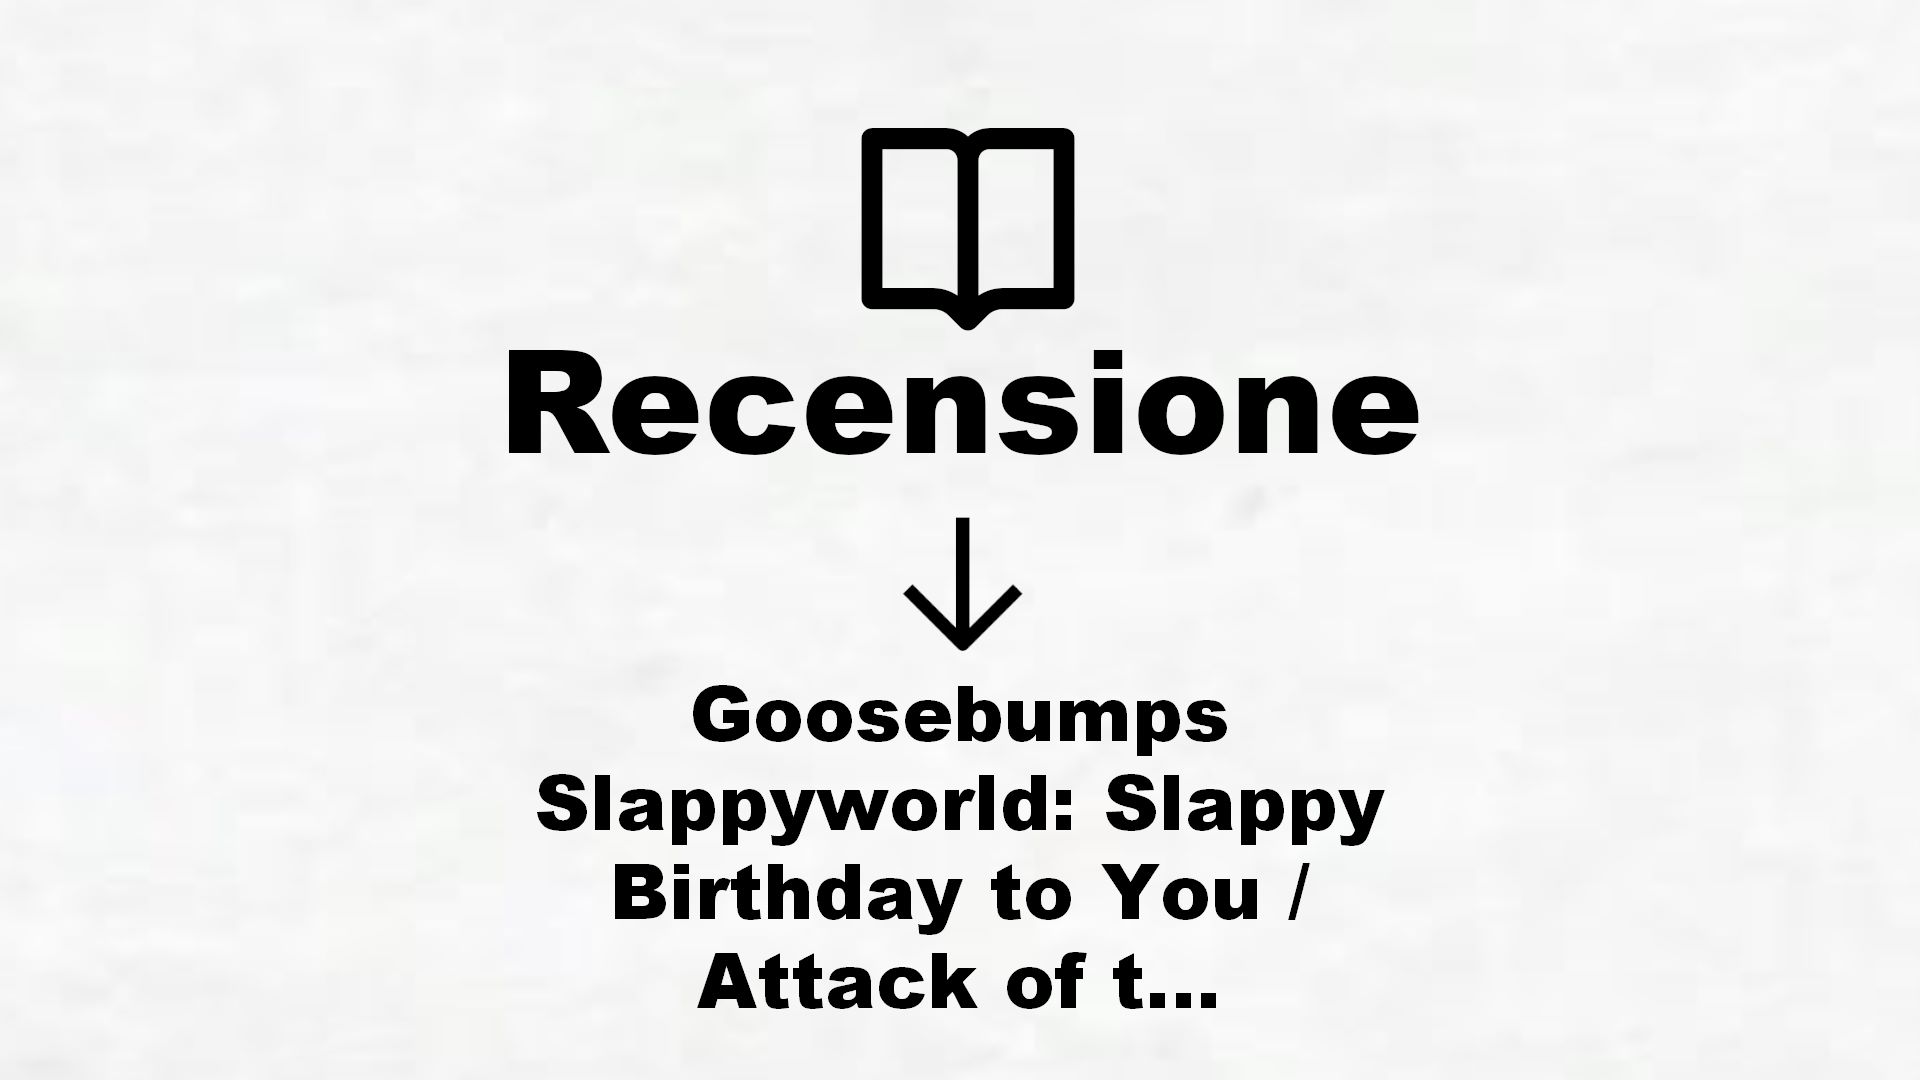 Goosebumps Slappyworld: Slappy Birthday to You / Attack of the Jack / I Am Slappy’s Evil Twin / Please Do Not Feed the Weirdo / Escape from Shudder Mansion – Recensione Libro